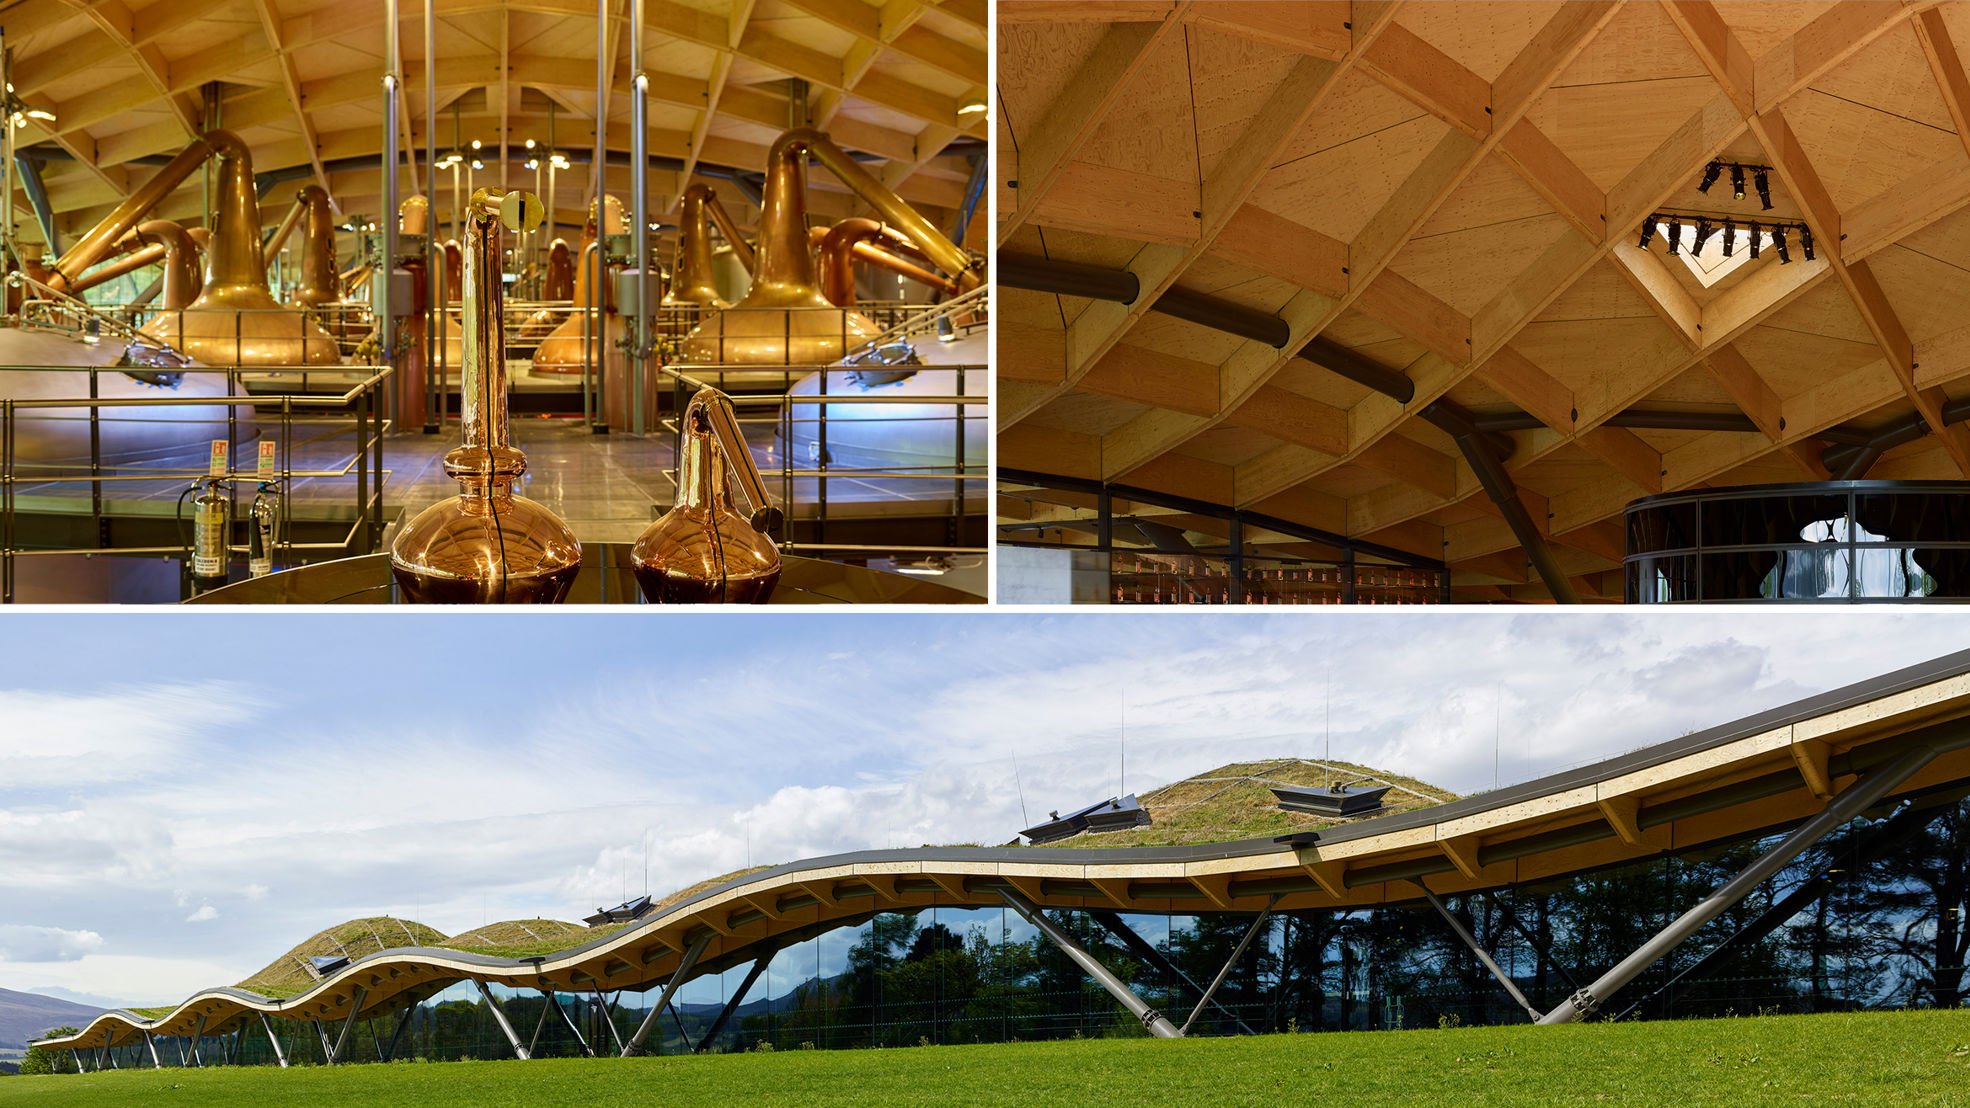 The wooden roof of the Macallan Distillery